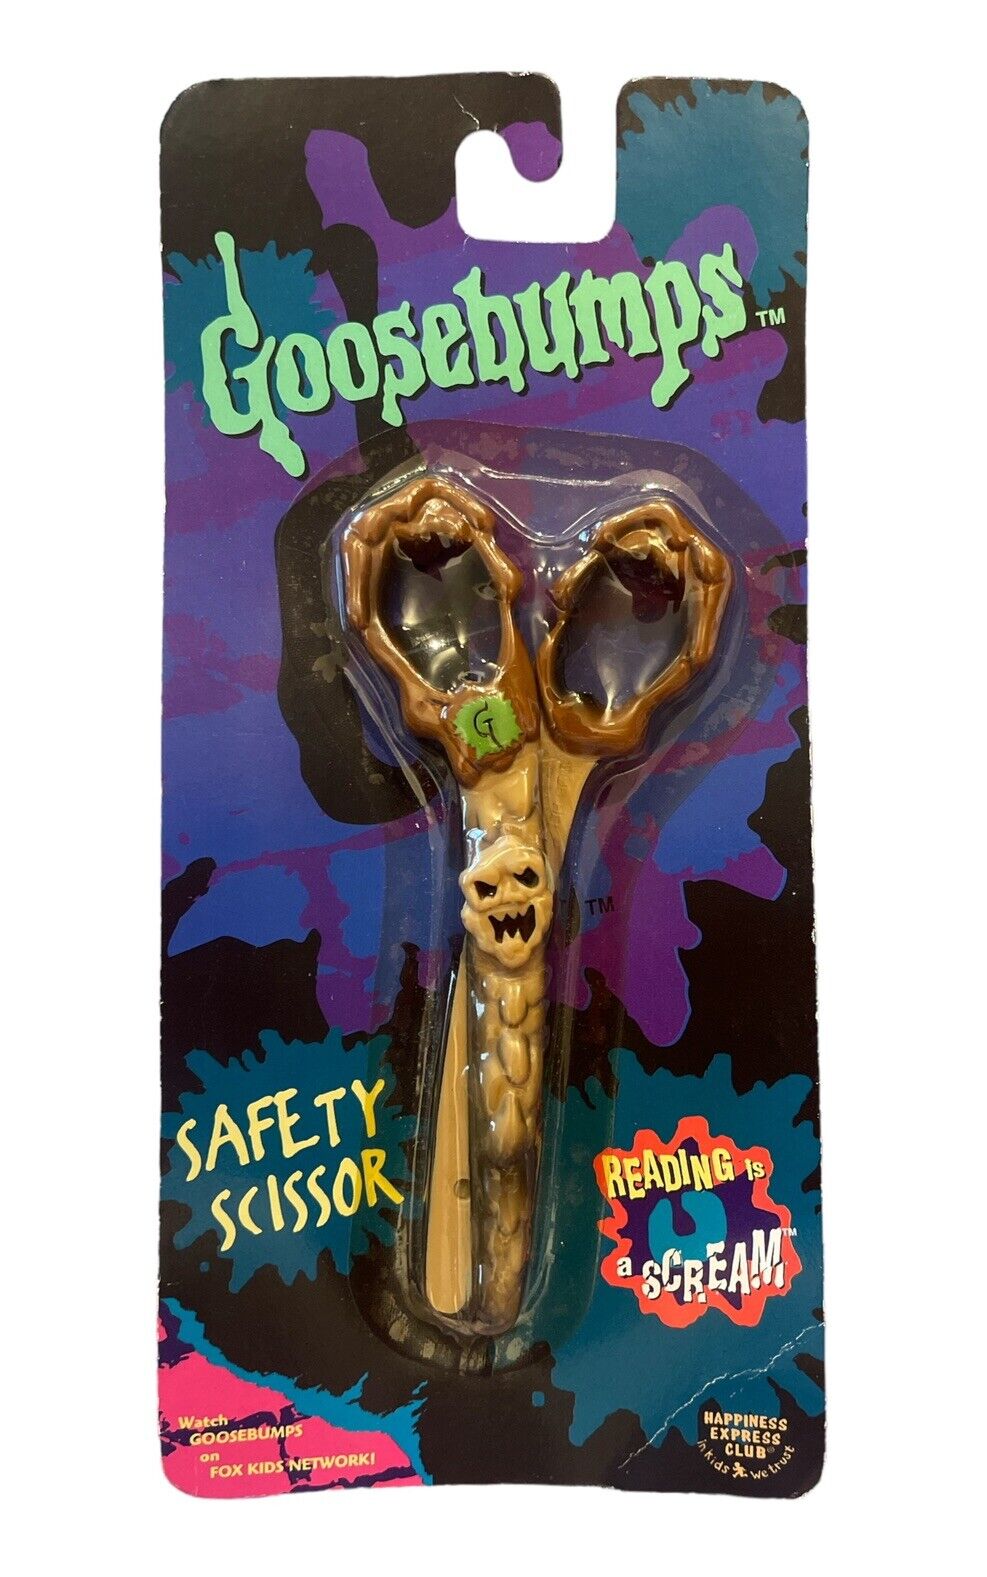 Goosebumps  Safety Scissors Happiness Express Inc Vintage New In Pack